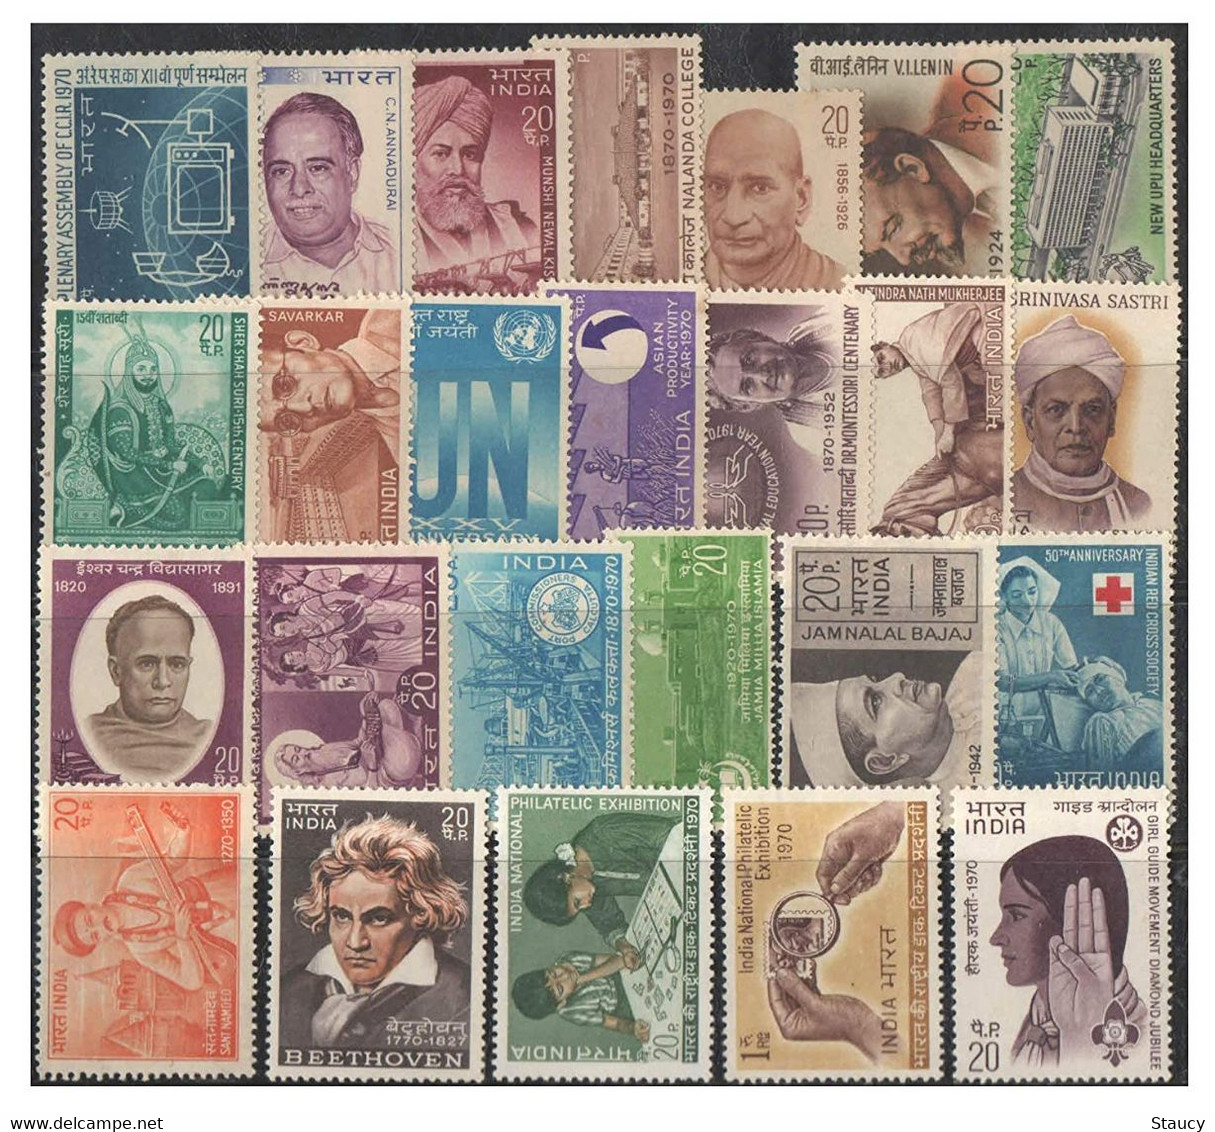 India 1970 Complete Year Pack / Set / Collection Total 25 Stamps (No Missing) MNH As Per Scan - Années Complètes